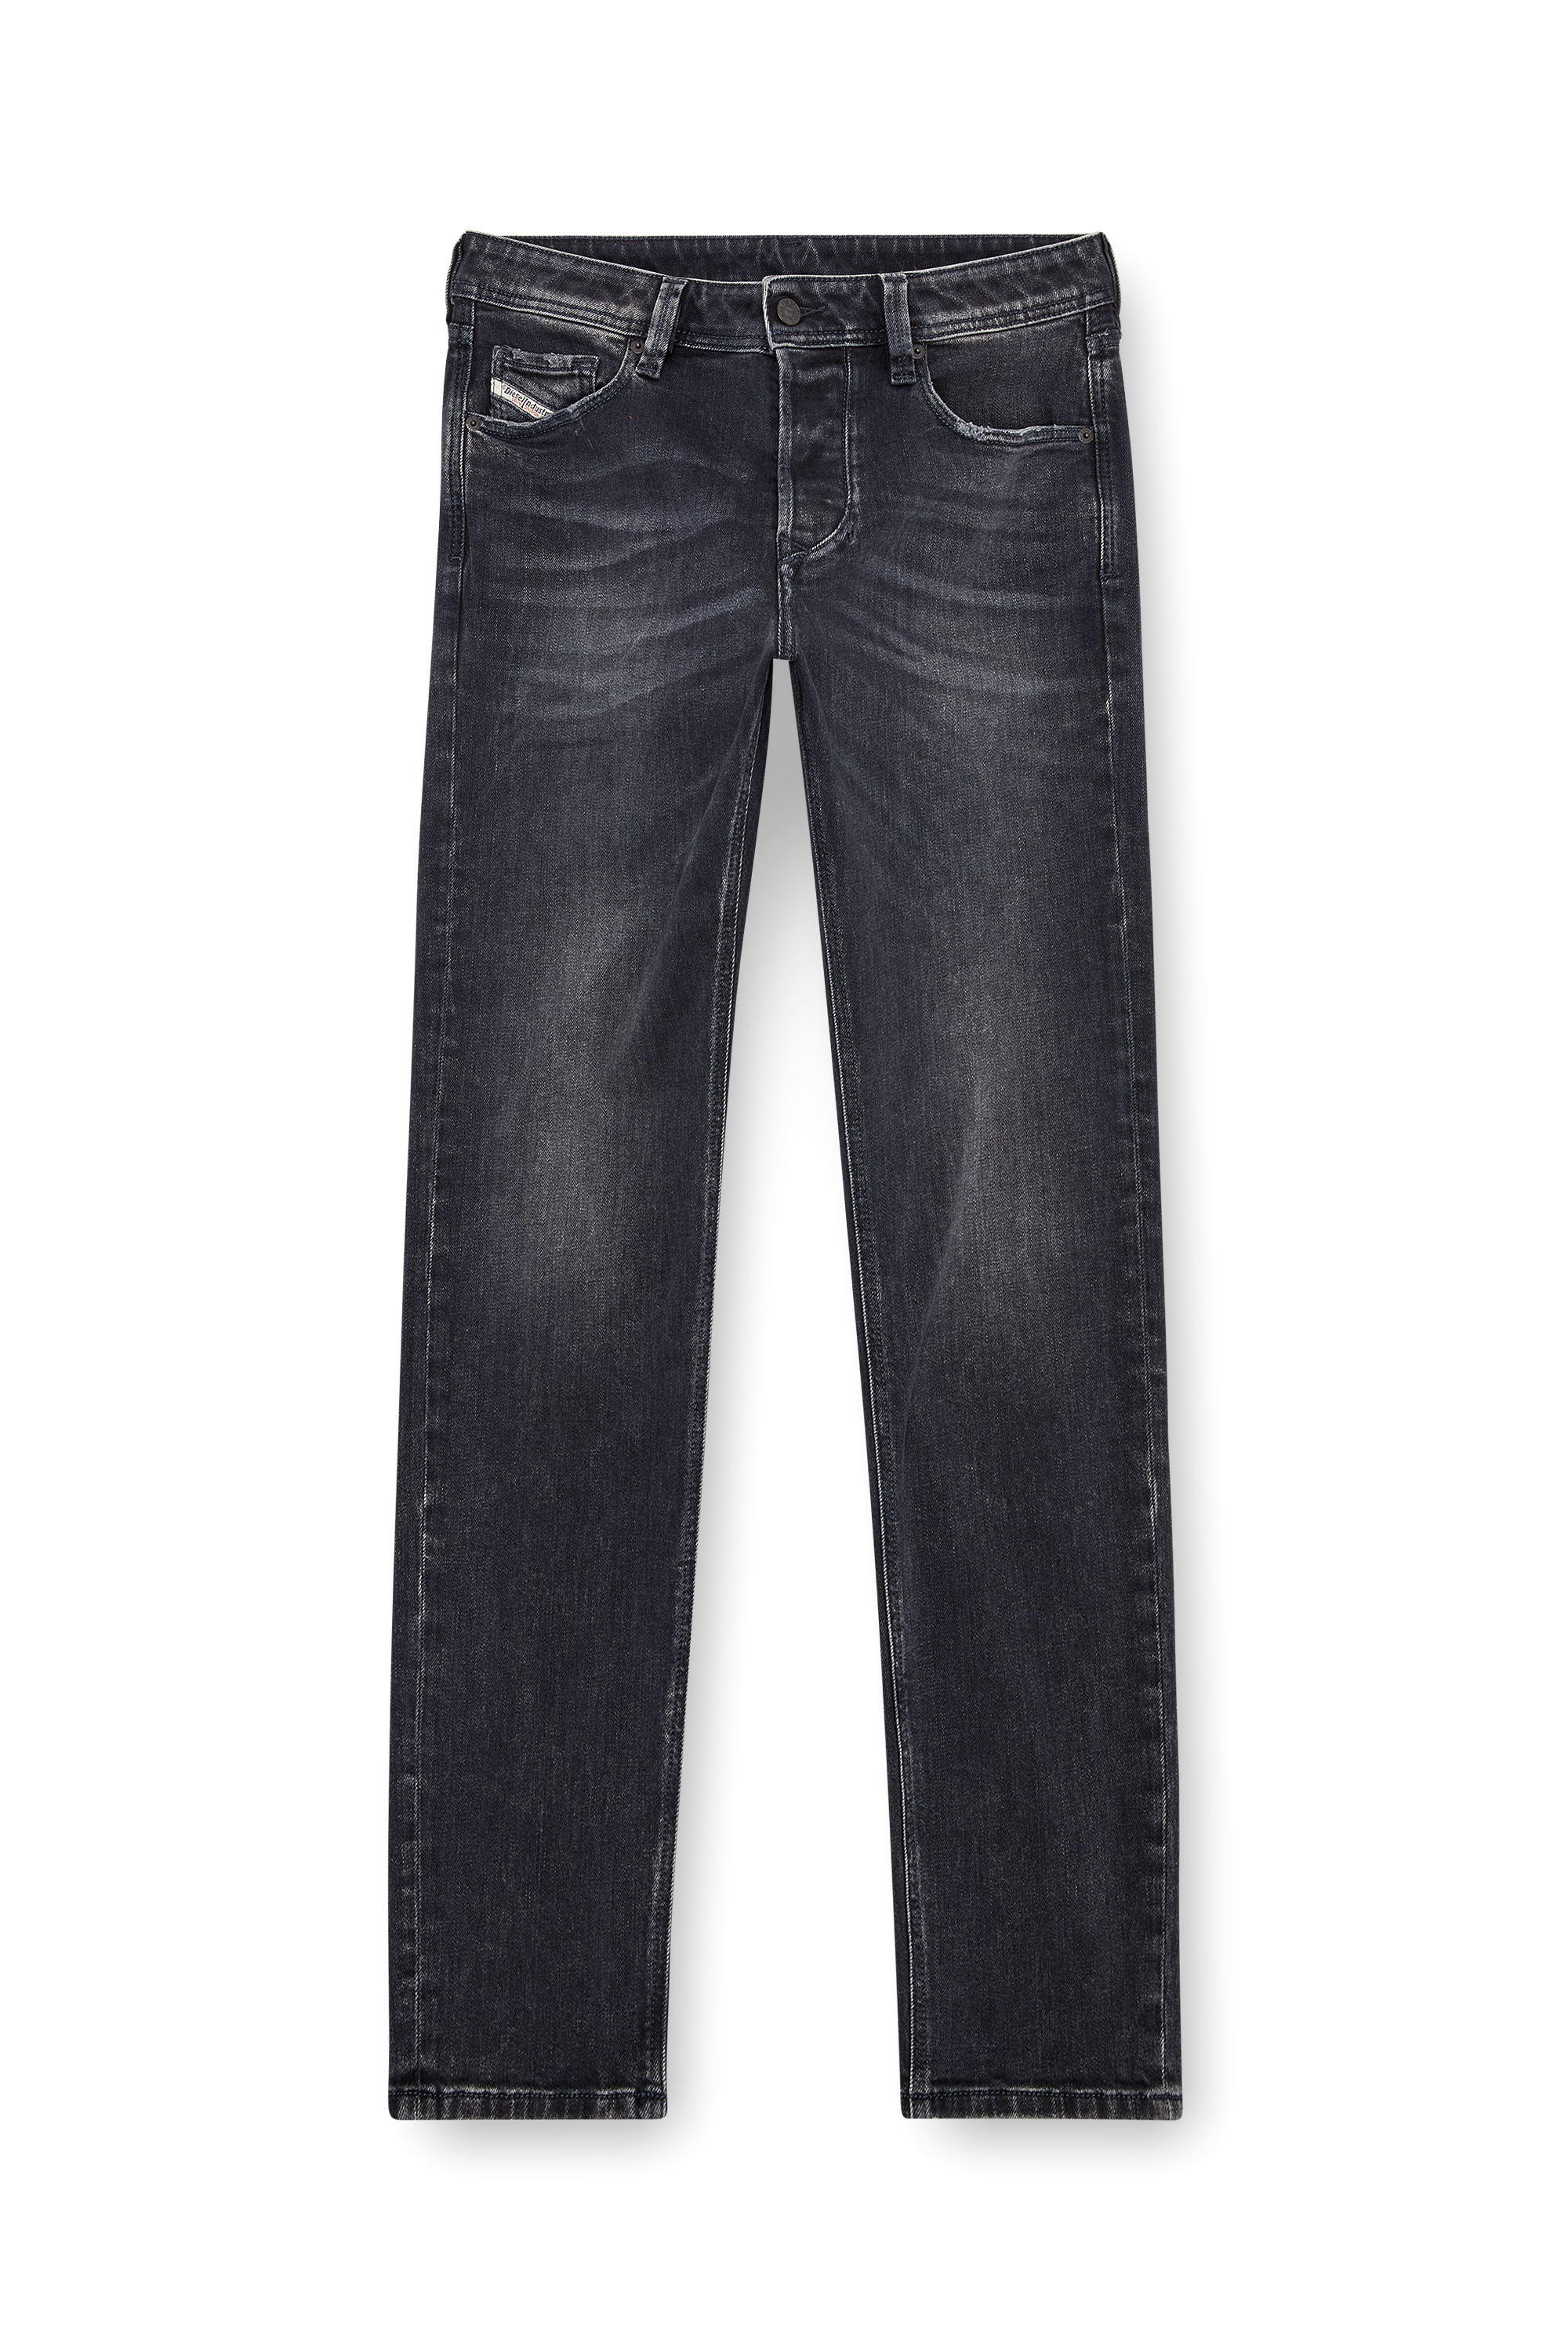 Diesel - Tapered Jeans 1986 Larkee-Beex 09K51, Hombre Tapered Jeans - 1986 Larkee-Beex in Negro - Image 5